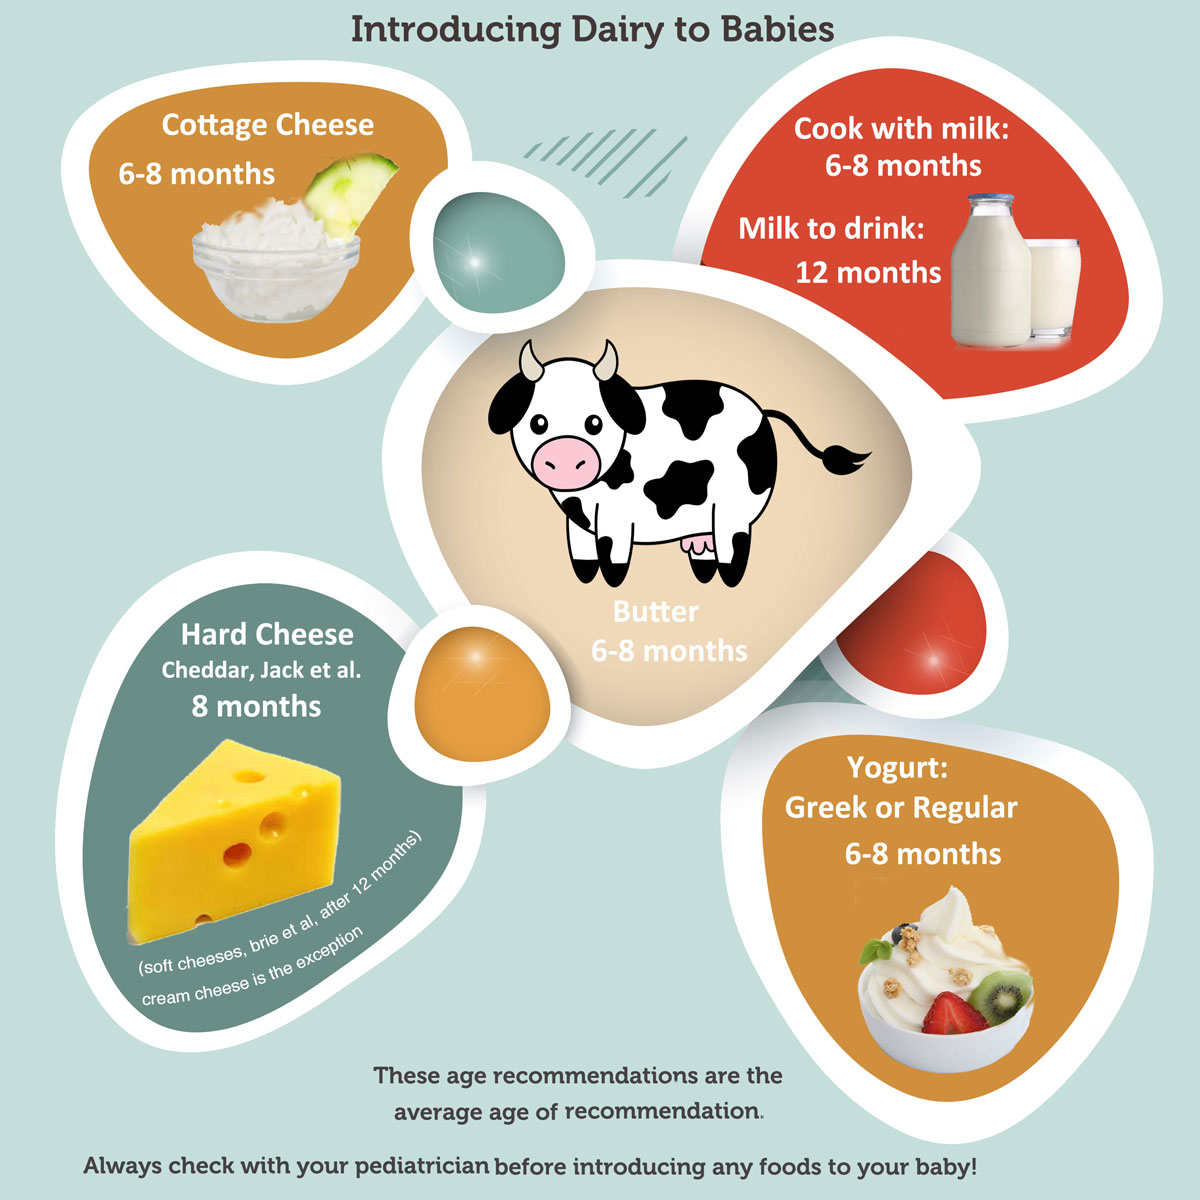 Dairy Infographic When To Introduce Milk And Dairy Products Wholesome Baby Food Guide